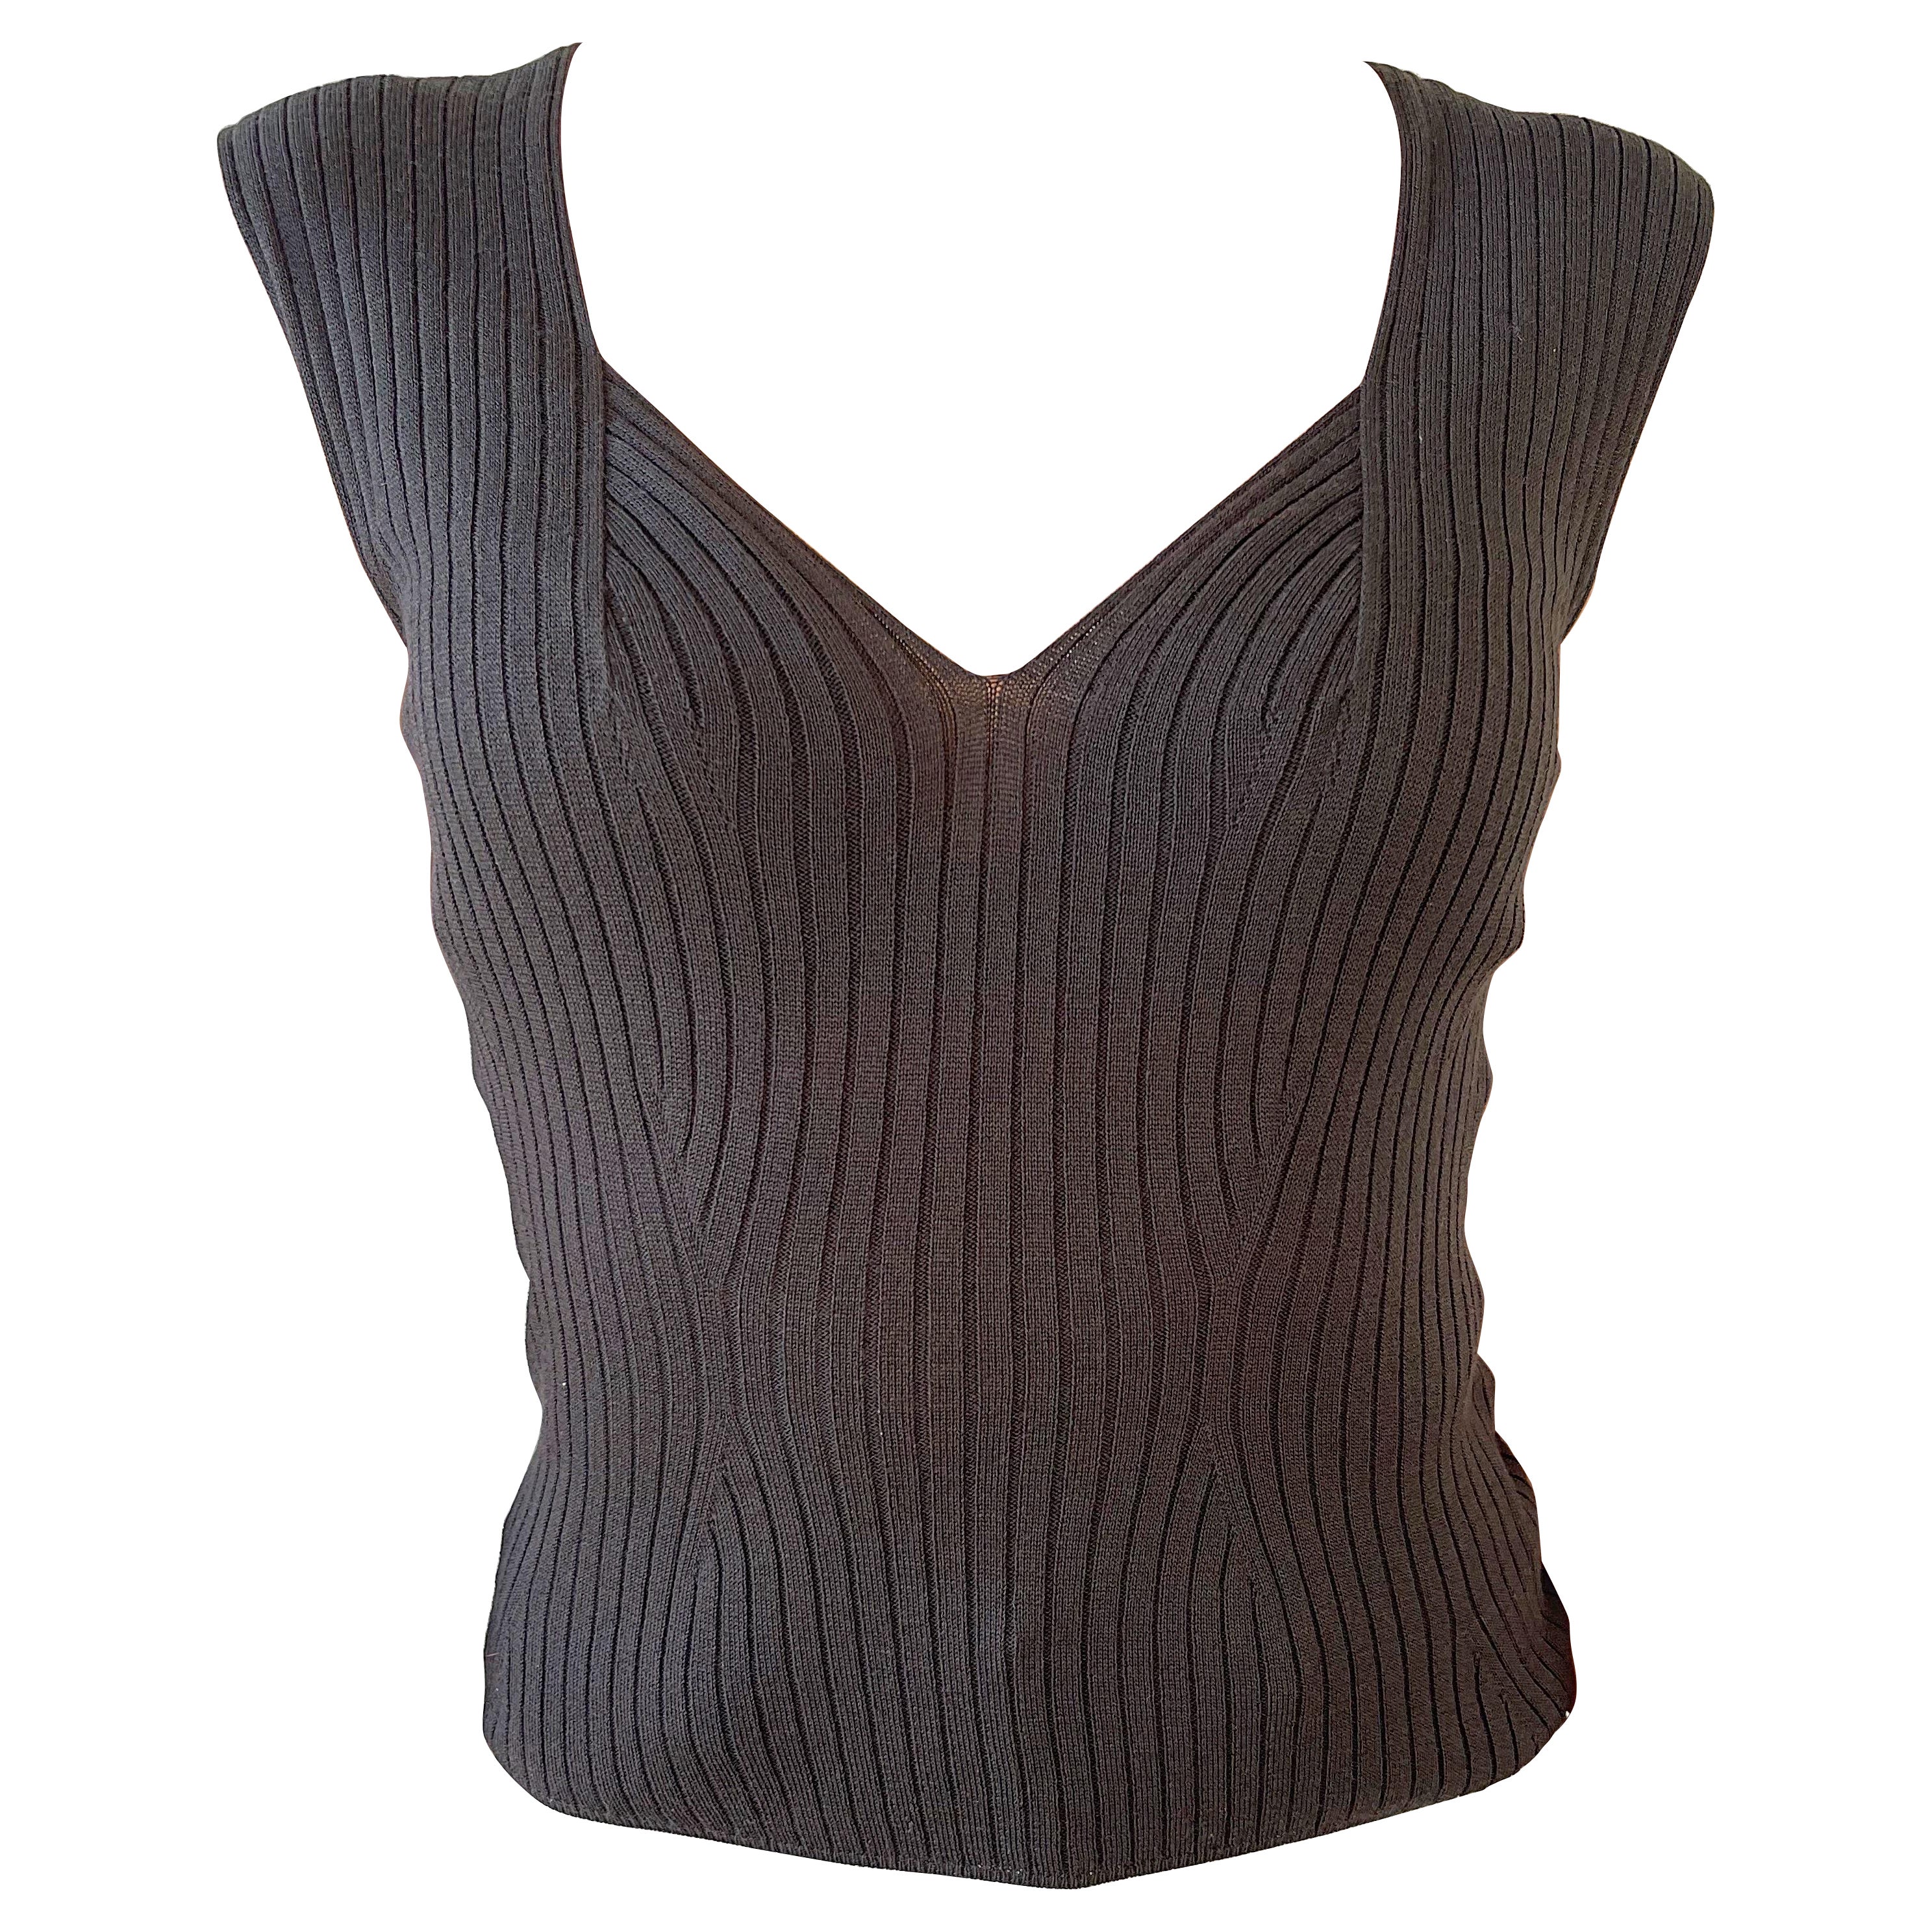 Yves Saint Laurent by Tom Ford Spring 2003 Brown Ribbed Sleeveless Vintage Top For Sale